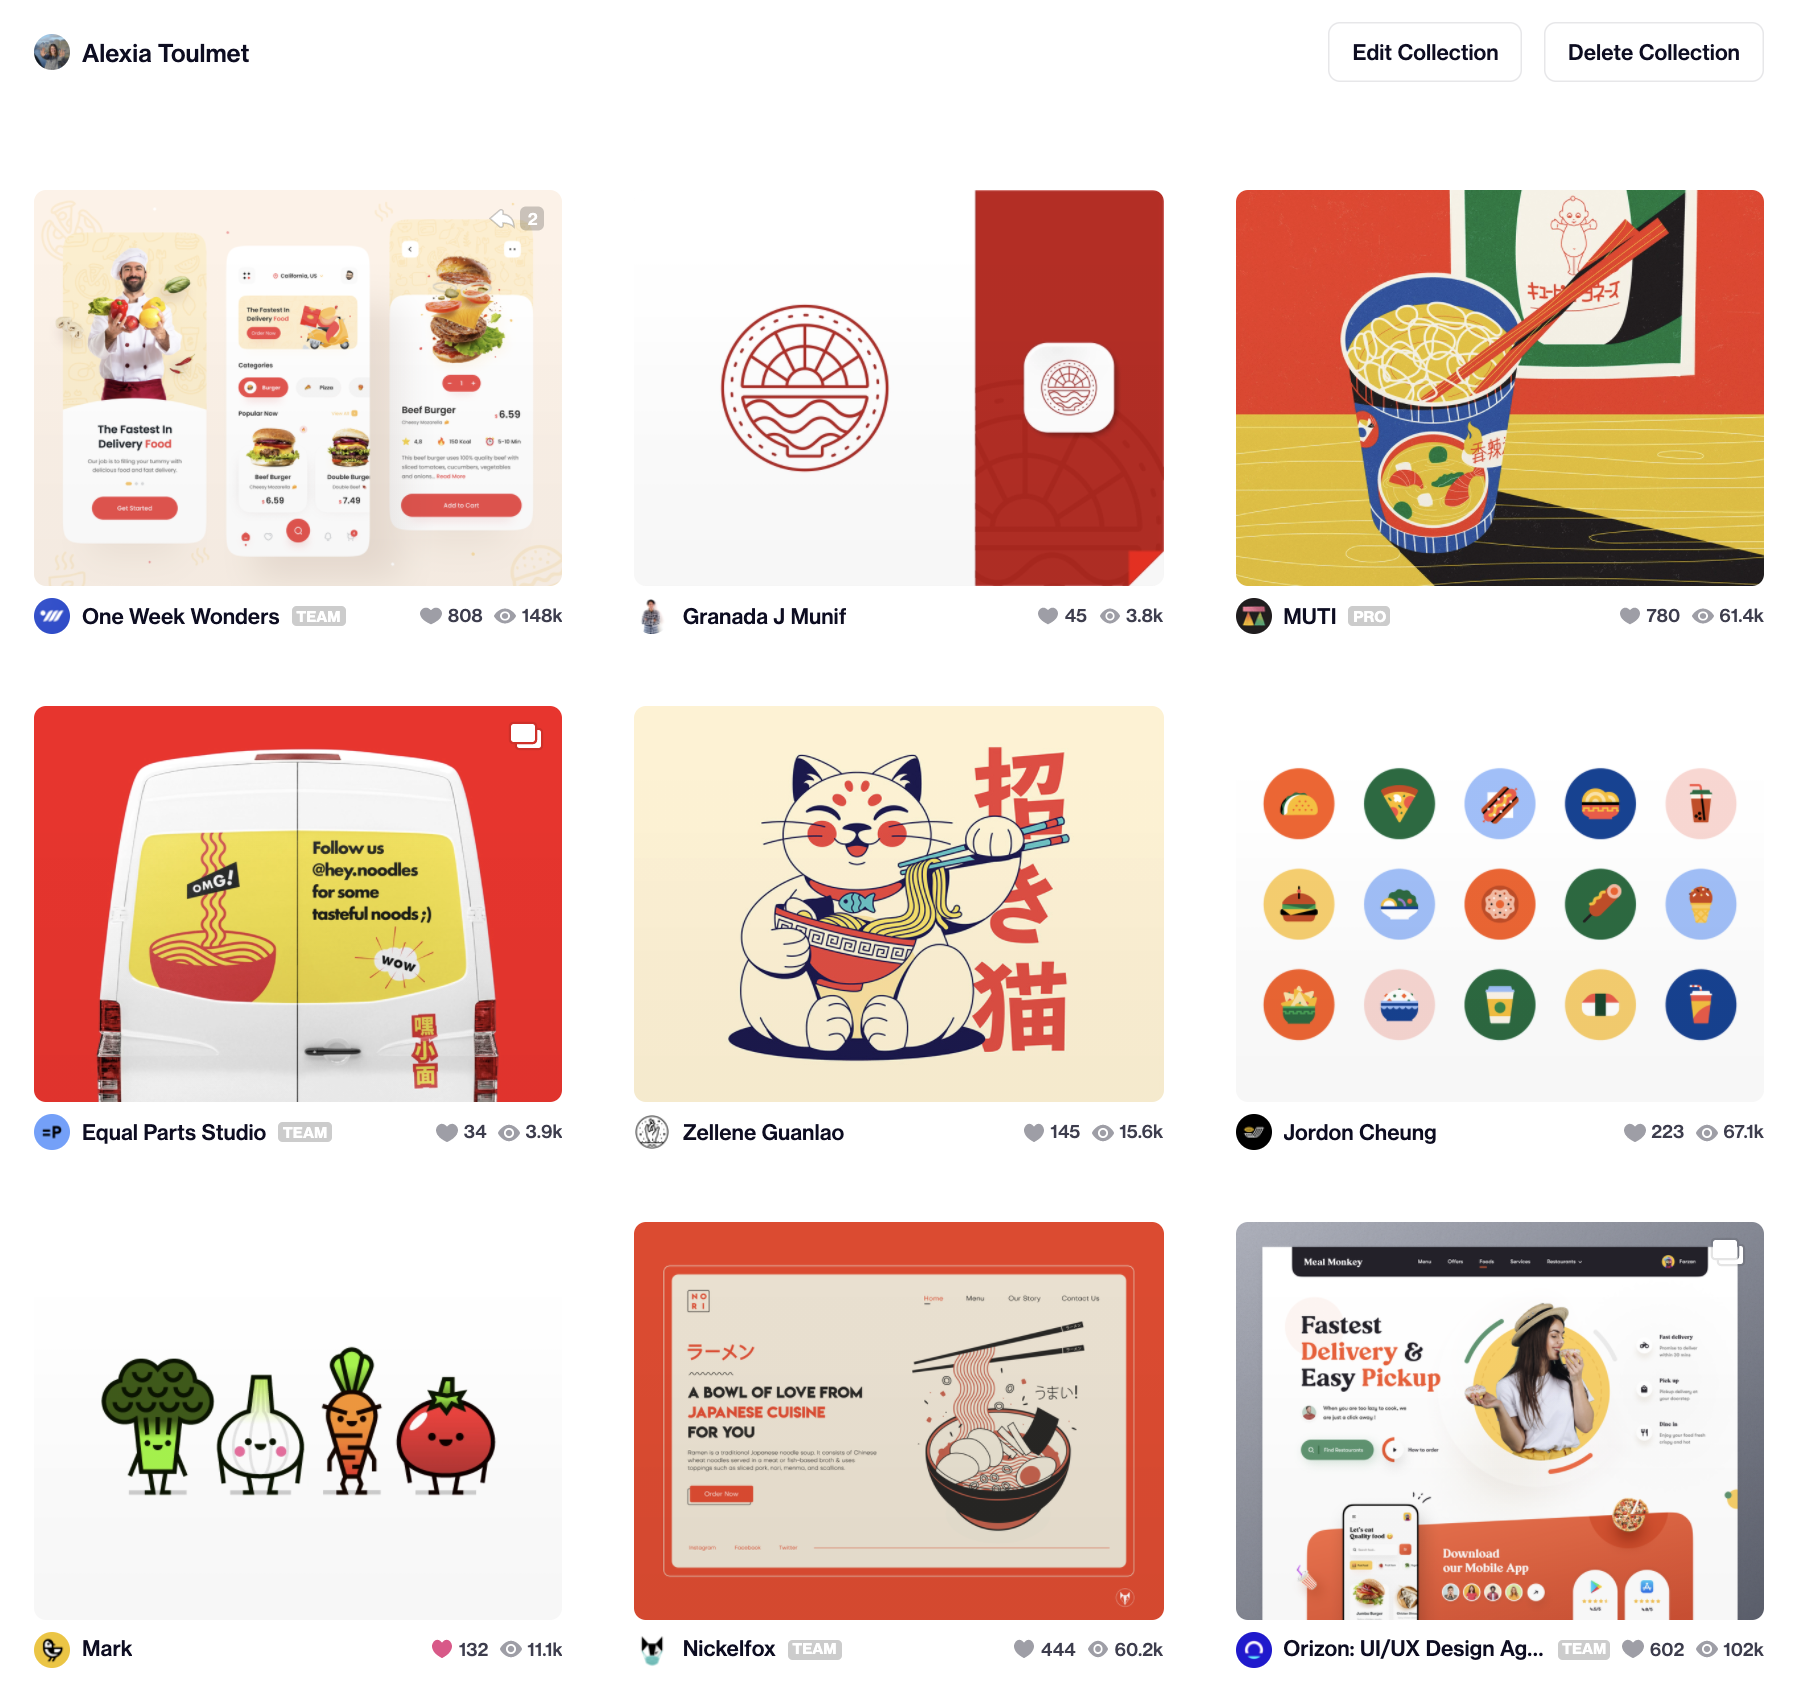 An online moodboard with 9 images with kawaii-inspired imagery and a red/orange color palette: some online meal ordering interfaces, some images of Asian noodles and one cartoon-style drawing of anthropomorphized vegetables.